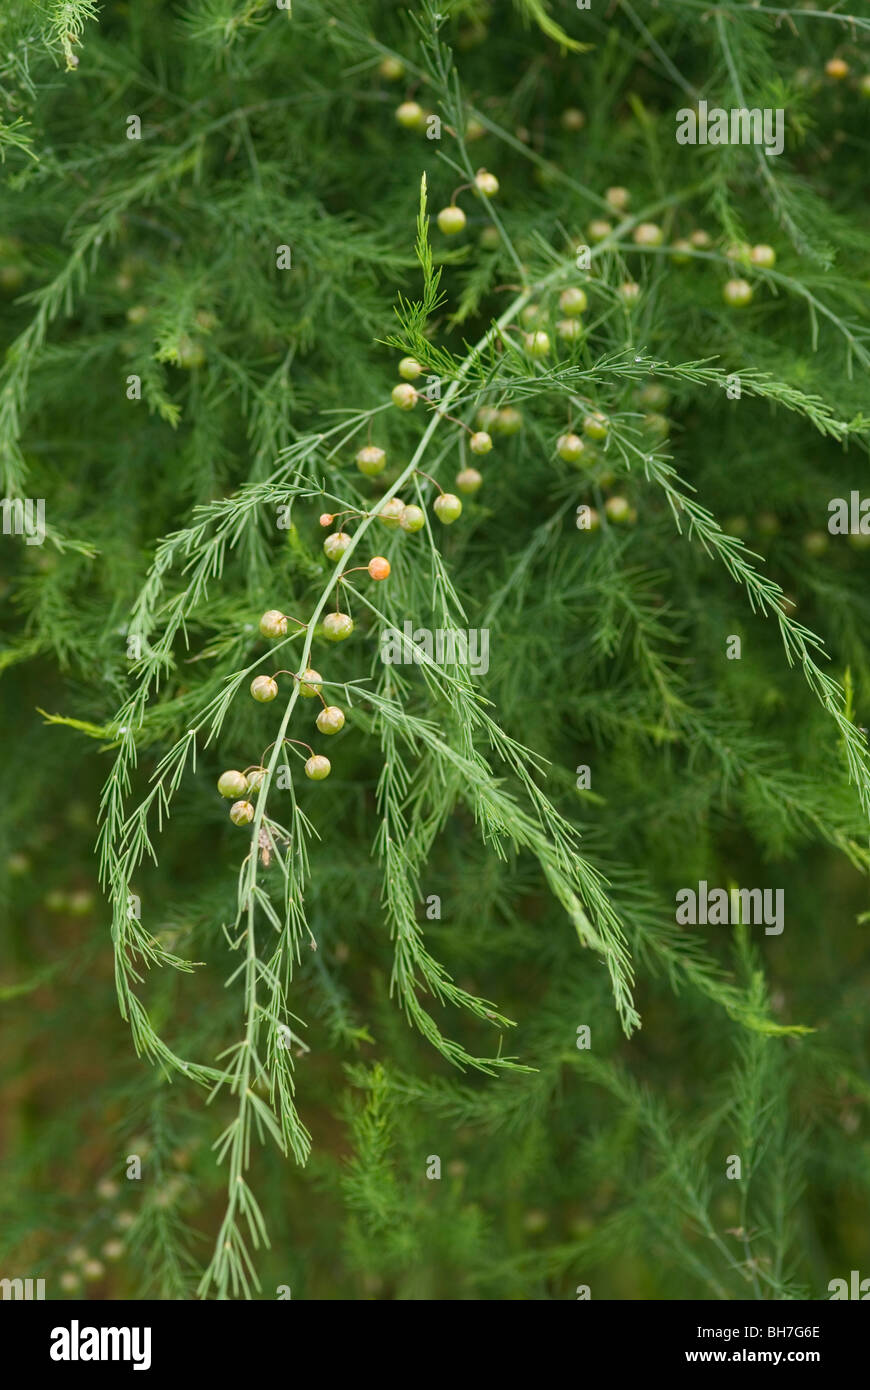 ASPARAGUS CONNOVERS COLOSSAL FOLIAGE AND BERRIES Stock Photo